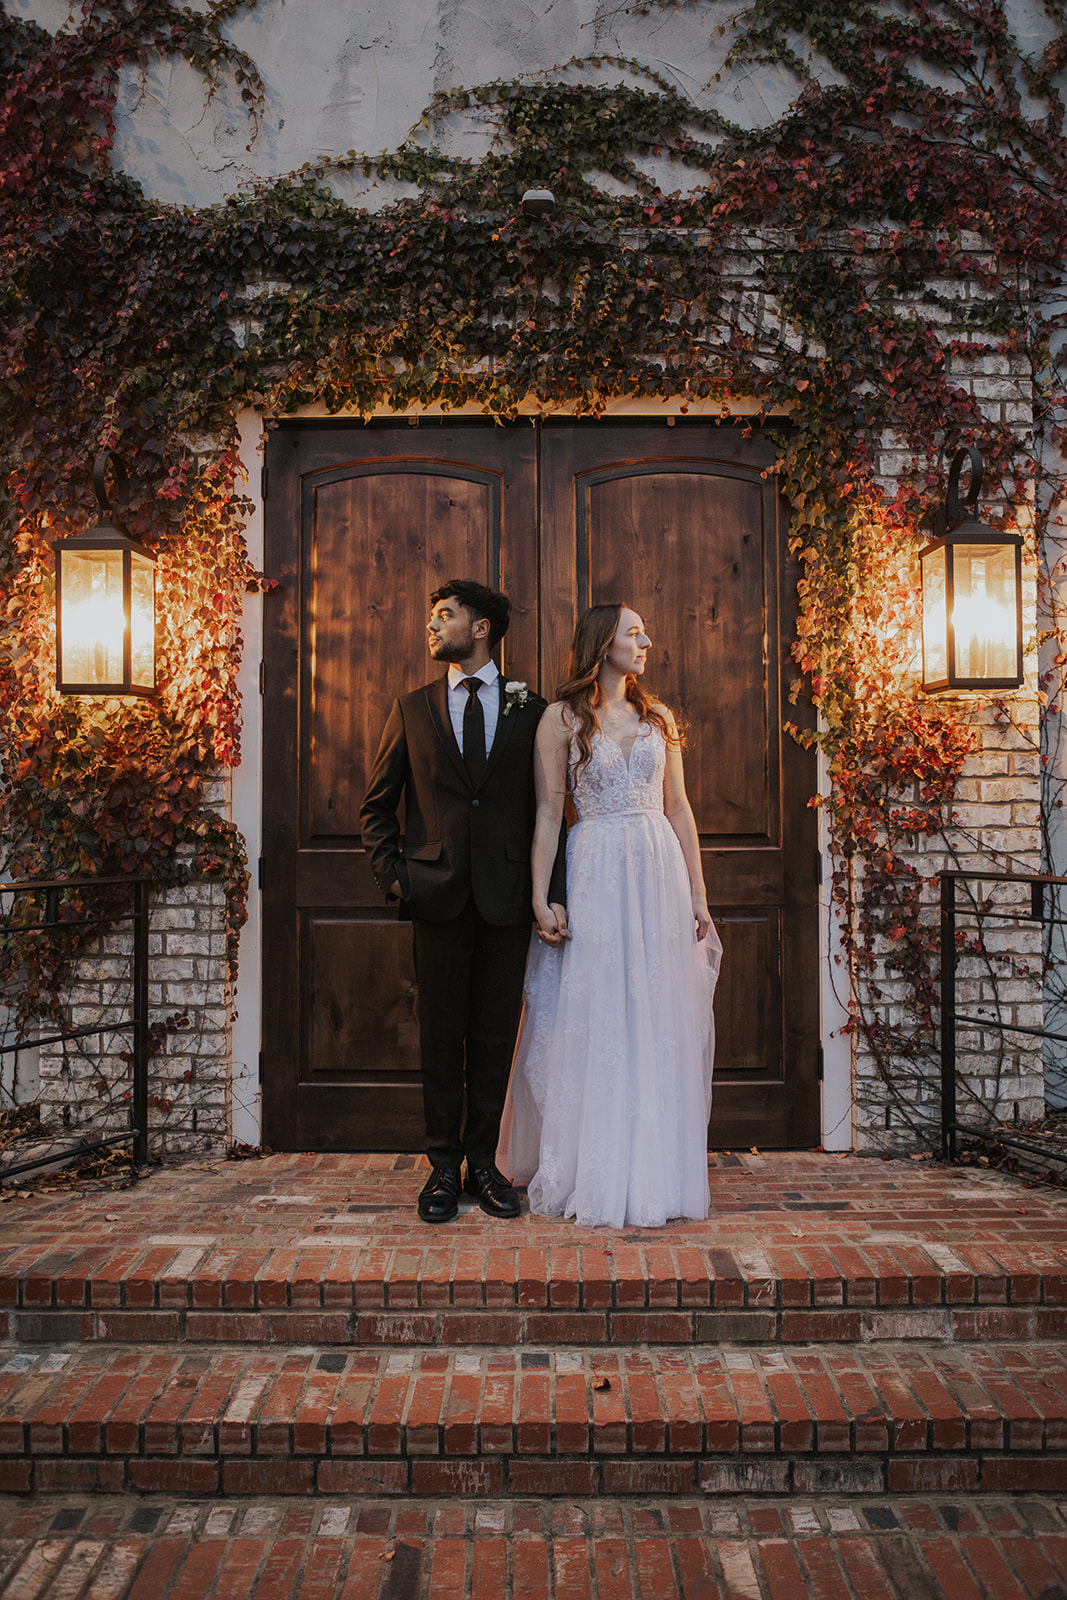 stunning bride and groom pose outside the church wedding venue